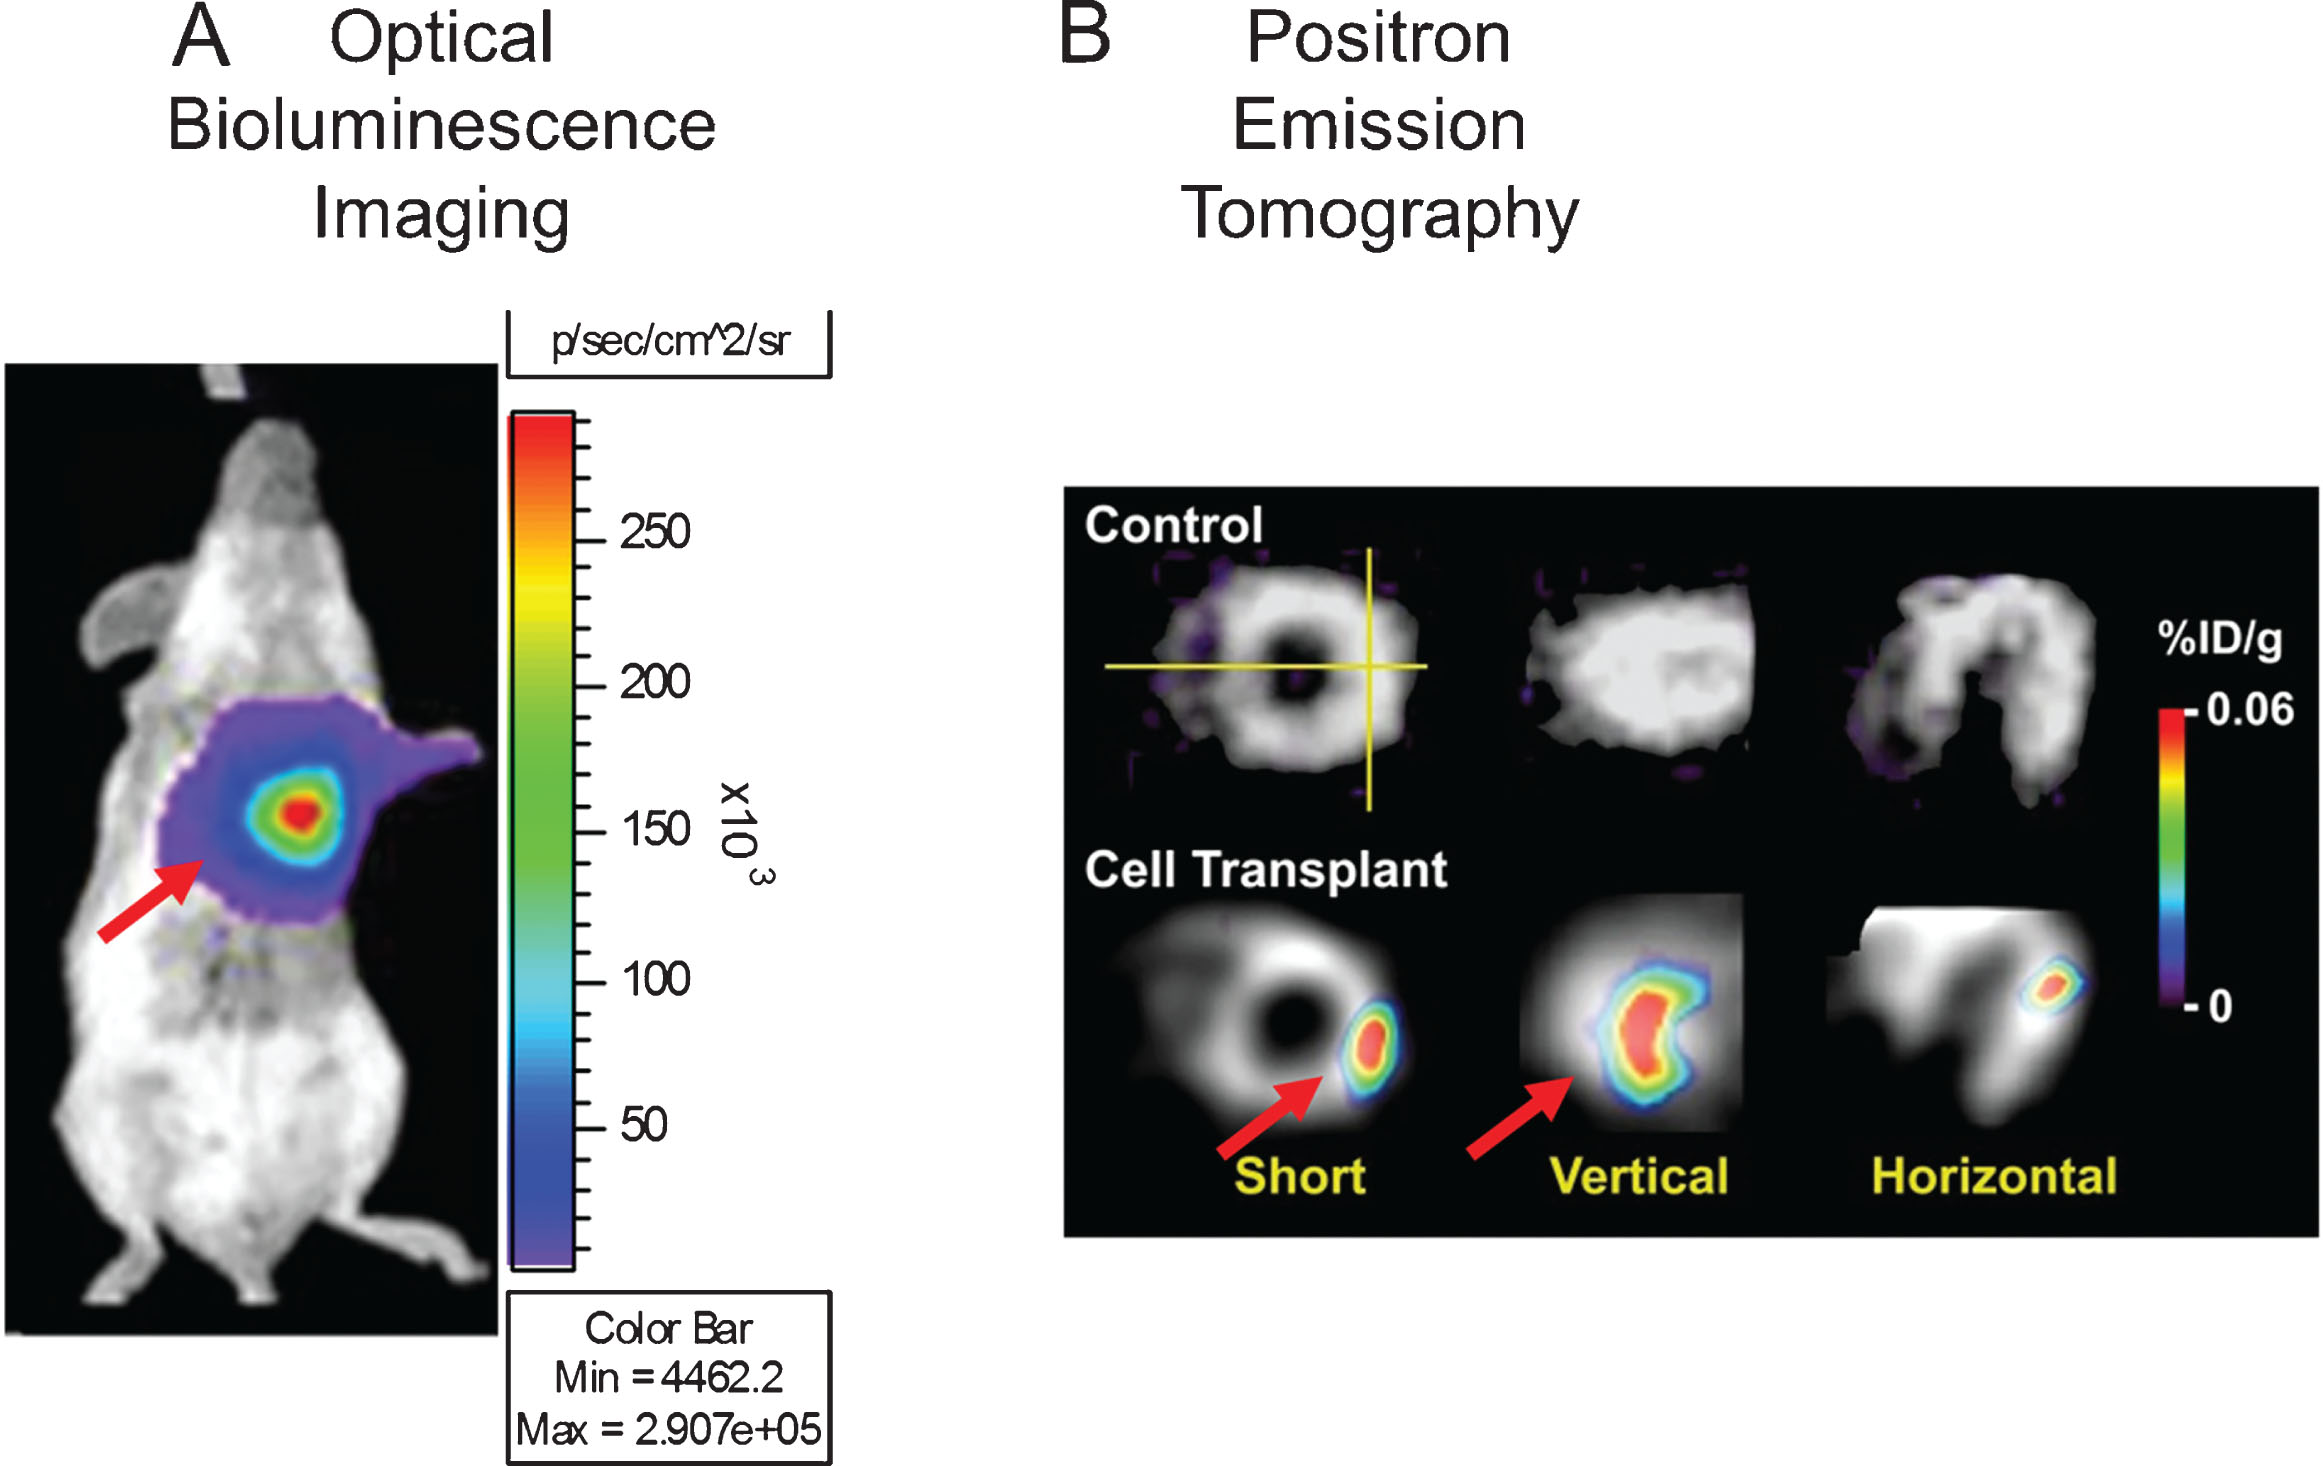 Examples of reporter gene imaging. Panel A, shows the different imaging modalities used in reporter gene imaging, such as optical bioluminescence imaging (left), and radionuclide medicine imaging (PET-right). Subjects are placed in the cooled CCD camera system or scanner, respectively, and the substrate administered. Panel B presents examples of cell imaging using a reporter gene approach using the previously mentioned modalities. On the left panel, cells are genetically modified to carry the optical fluc reporter gene, delivered to the myocardium, and also imaged using a CCD camera after administration of the substrate D-Luciferin. Color images of visible light are superimposed on photographic images of mice with a scale in photons per second per square centimeter per steradian (sr). On the right panel, cells carrying the PET reporter gene HSV1-tk have been transplanted to the myocardium. The figure depicts tomographic images of the myocardium after the administration of the PET reporter probe 18Fluorine 9-[4-fluoro-3-(hy{droxy methyl)butyl]guanine (18F-FHBG). The color scale (% ID/g) indicates the percentage of injected dose that accumulates per gram of tissue. Red arrows indicate the area where cells are located. Reprinted from Cao F, et al. In Vivo Visualization of Embryonic Stem Cell Survival, Proliferation, and Migration After Cardiac Delivery. Circulation 2006; 113(7):1005-1014 and Lijkwan MA, et al. Trends Cardiovascular Medicine 2010; 6:183-8 with permission.